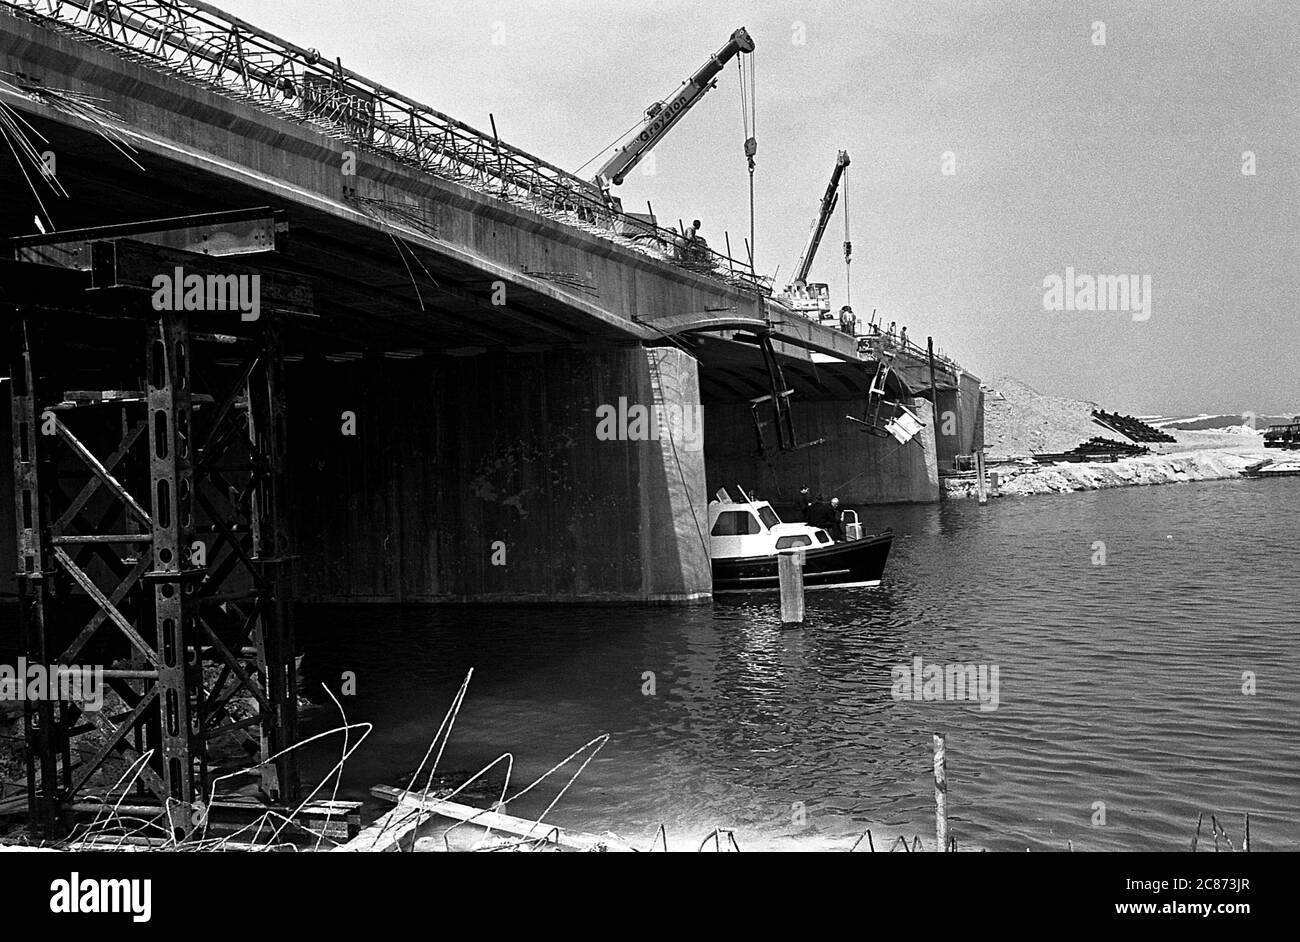 AJAXNETPHOTO. 1975. TIPNER, PORTSMOUTH, ENGLAND. - BRIDGE COLLAPSE - A SECTION OF THE M275 TIPNER FLYOVER COLLAPSED INTO THE LAKE. PHOTO:JONATHAN EASTLAND/AJAX. REF:202206 18 Stock Photo